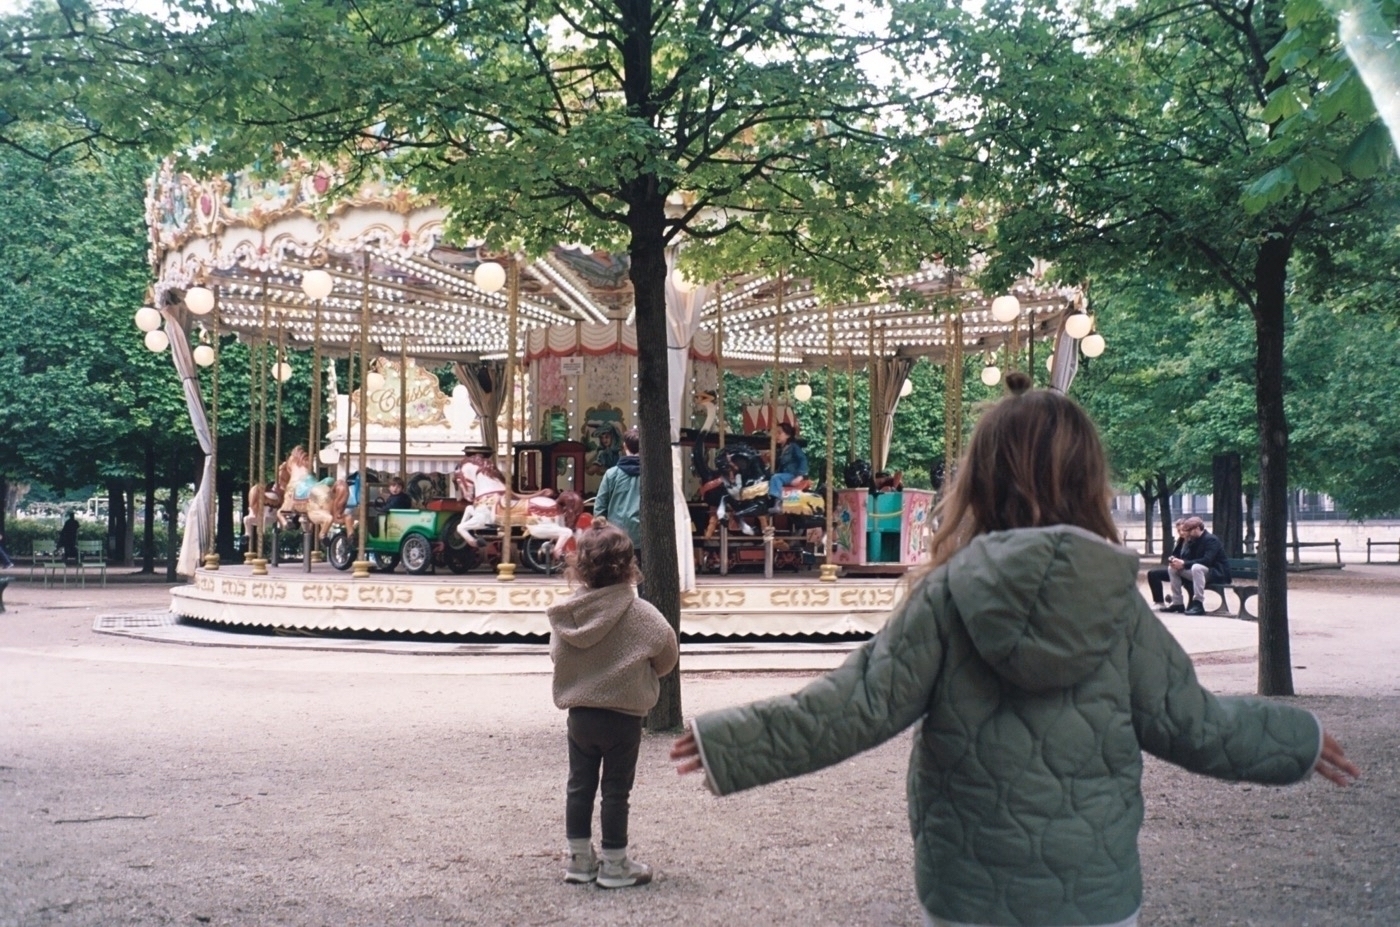 Carousel. Photo taken with Leica Z2X in Paris by Josh Withers.